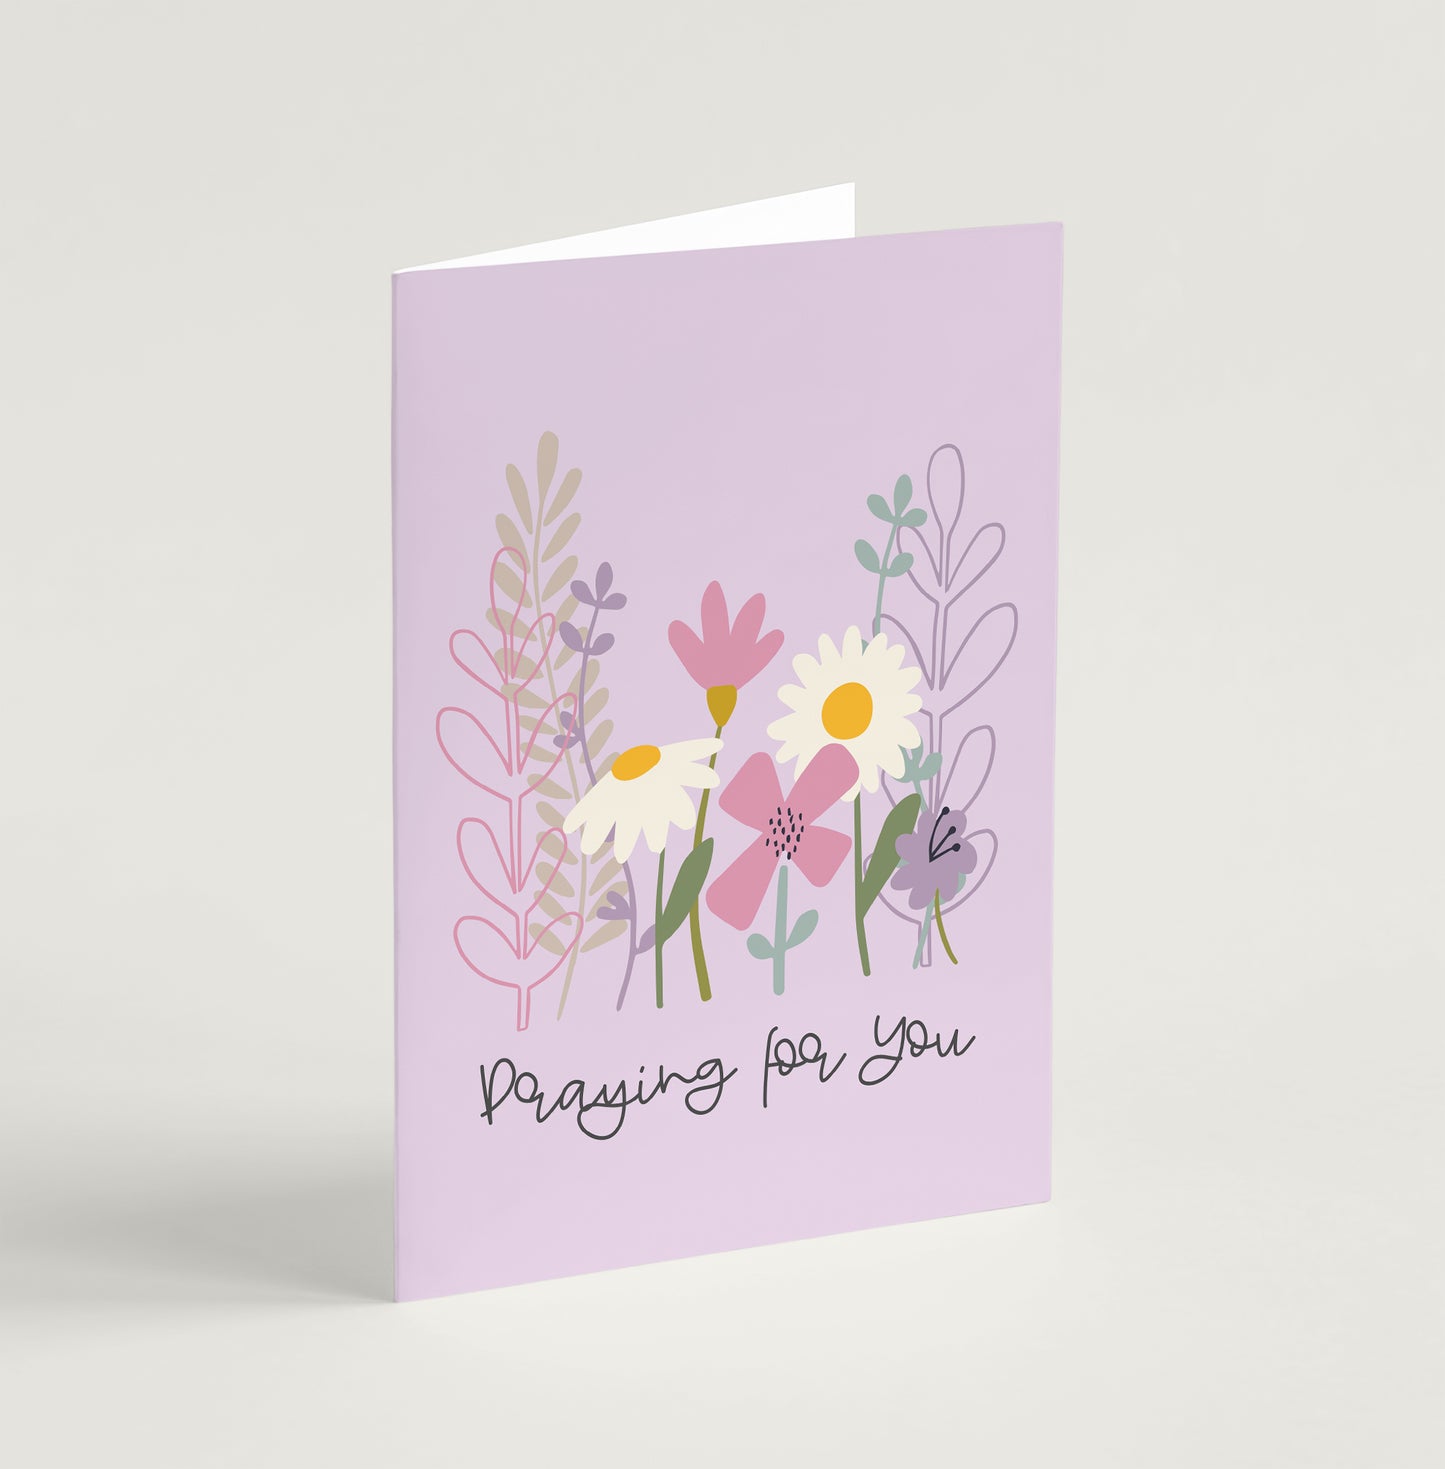 'Praying for You' (Wild Meadow) - Greeting Card